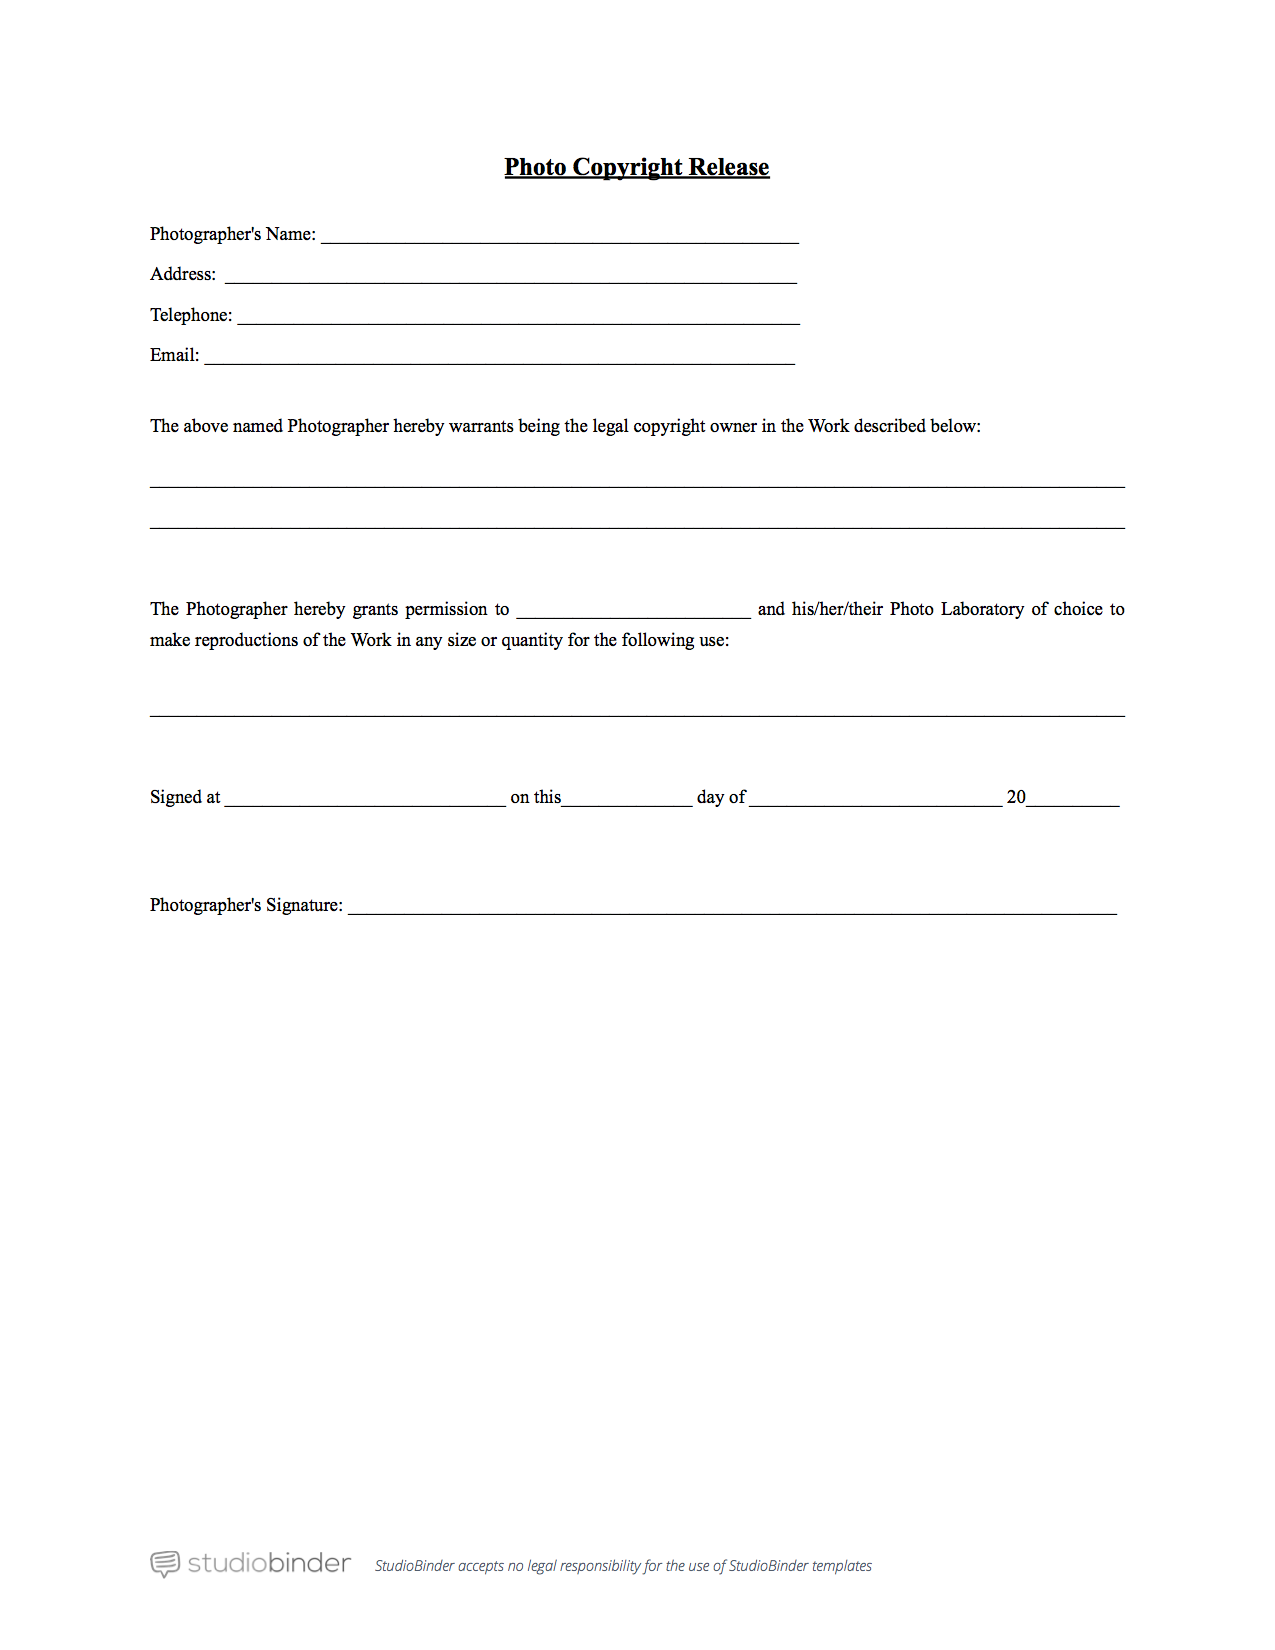 Why You Should Have a Photo Release Form Template